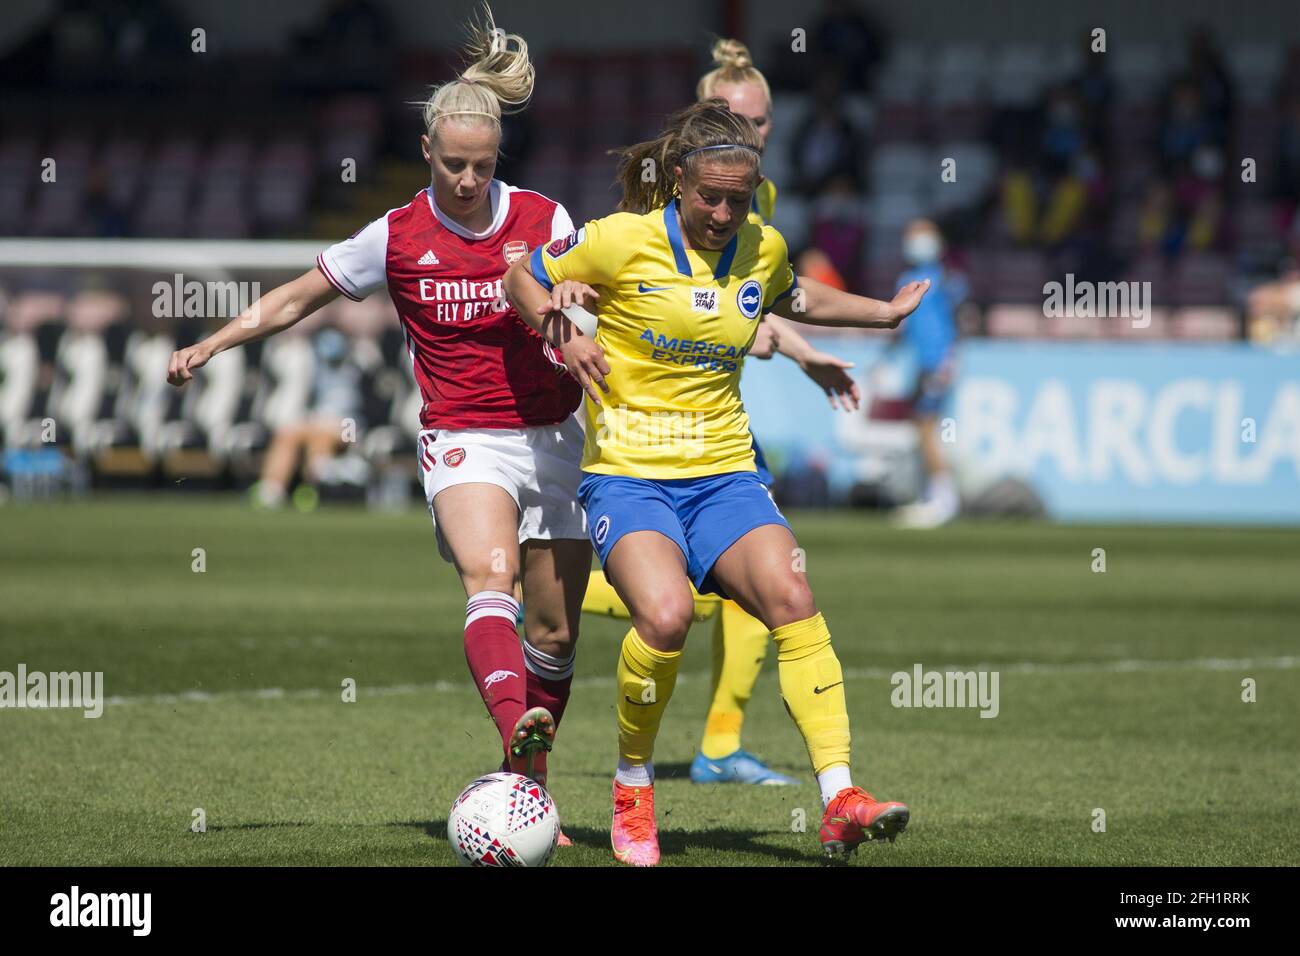 Borehamwood, UK. 25th Apr, 2021. Beth Mead (#9 Arsenal) and Megan Connolly (#8 Brighton FC) battle for the ball during the FA Women's Super League match between Arsenal and Brighton FC at Meadow Park in Borehamwood. Credit: SPP Sport Press Photo. /Alamy Live News Stock Photo